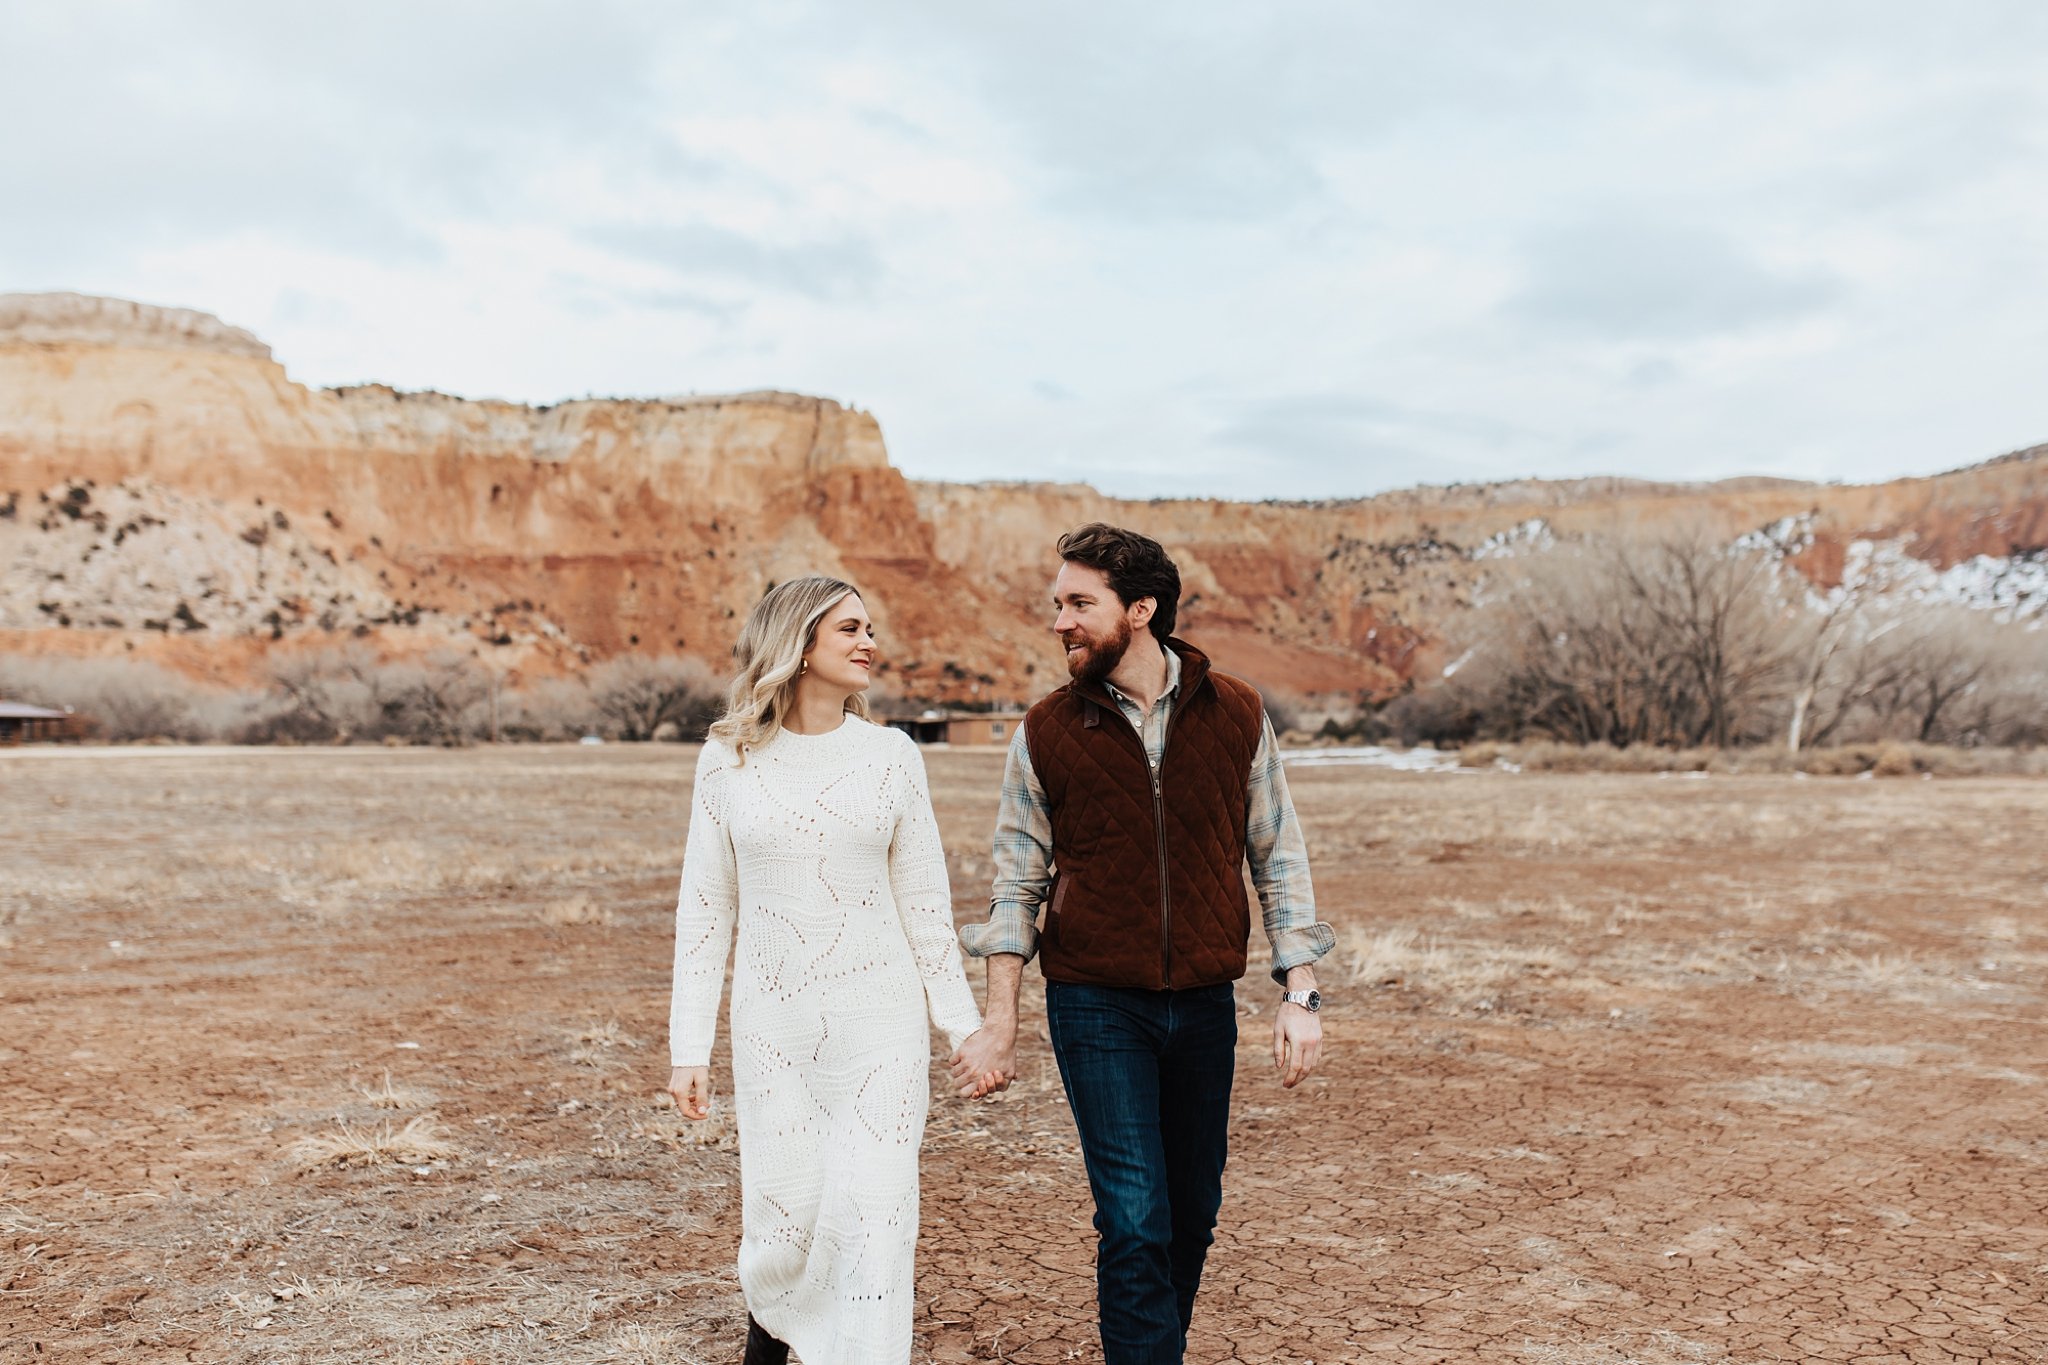 Alicia+lucia+photography+-+albuquerque+wedding+photographer+-+santa+fe+wedding+photography+-+new+mexico+wedding+photographer+-+new+mexico+wedding+-+southwest+engagement+-+ghost+ranch+engagement+-+ghost+ranch+wedding_0008.jpg